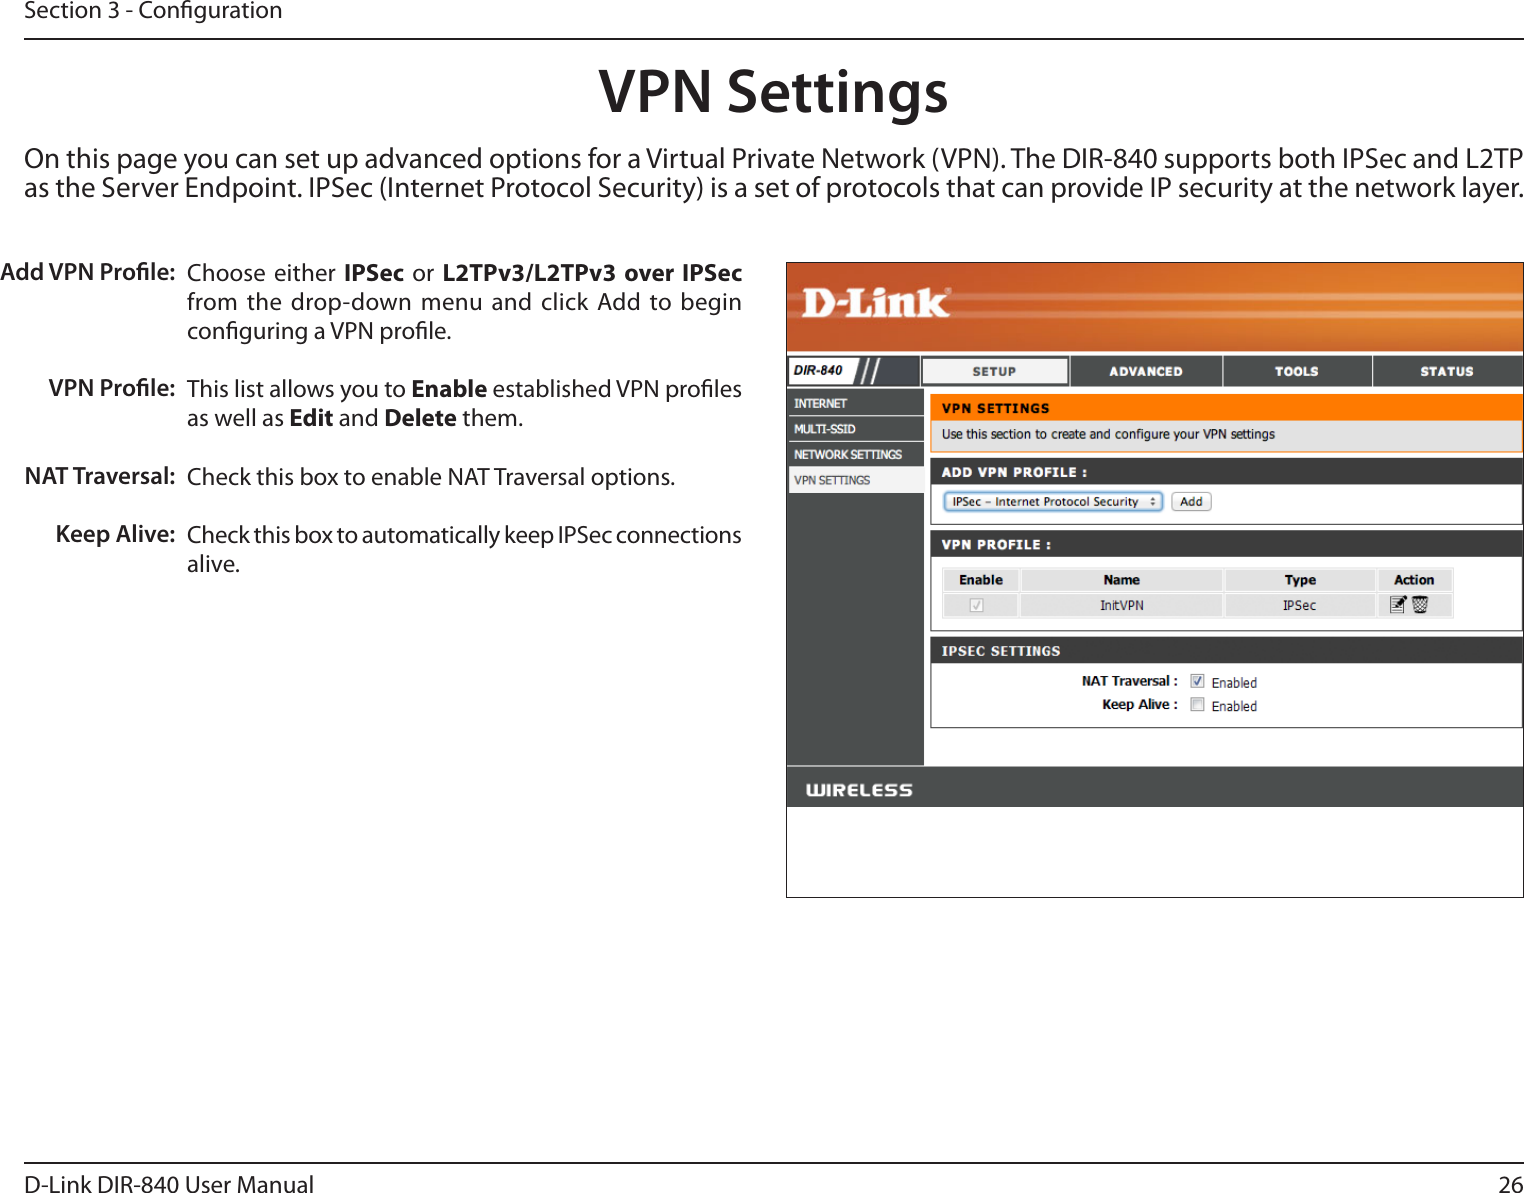 26D-Link DIR-840 User ManualSection 3 - CongurationChoose either  IPSec  or  L2TPv3/L2TPv3 over IPSec from the  drop-down  menu  and  click  Add  to  begin conguring a VPN prole.This list allows you to Enable established VPN proles as well as Edit and Delete them.Check this box to enable NAT Traversal options.Check this box to automatically keep IPSec connections alive.Add VPN Prole:VPN Prole:NAT Traversal:Keep Alive:On this page you can set up advanced options for a Virtual Private Network (VPN). The DIR-840 supports both IPSec and L2TP as the Server Endpoint. IPSec (Internet Protocol Security) is a set of protocols that can provide IP security at the network layer.VPN Settings